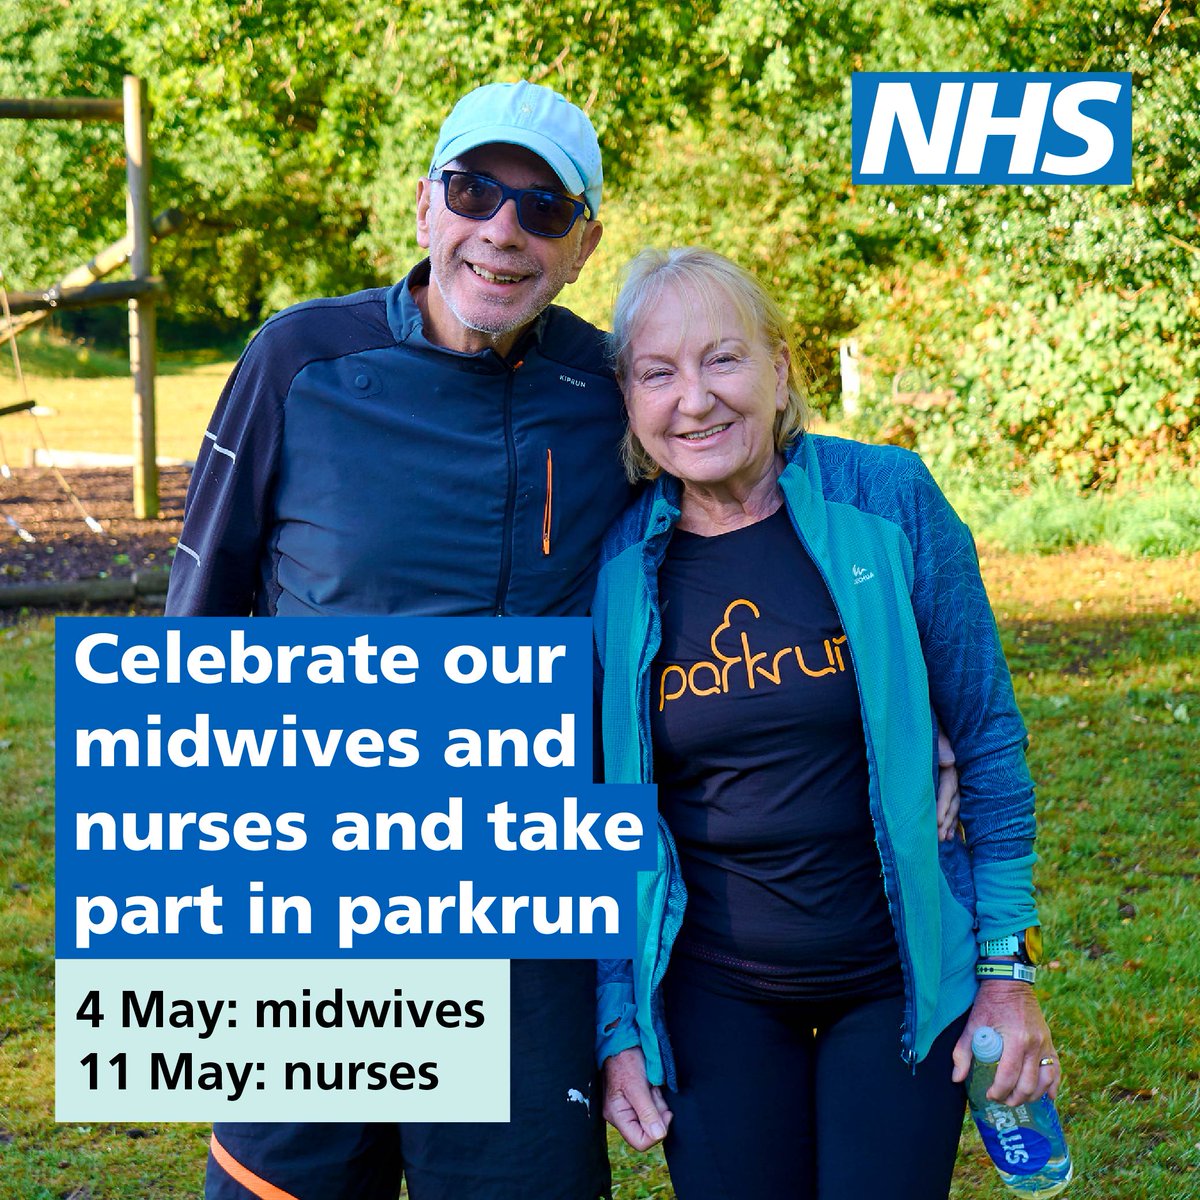 Take part in a local @parkrunUK event on 4 May to mark International Day of the Midwife #IDM2024 and 11 May for International Nurses Day #IND2024. You can walk, jog, run or volunteer, to recognise and thank our #teamCMidO midwives and #teamCNO nurses. parkrun.org.uk/register/